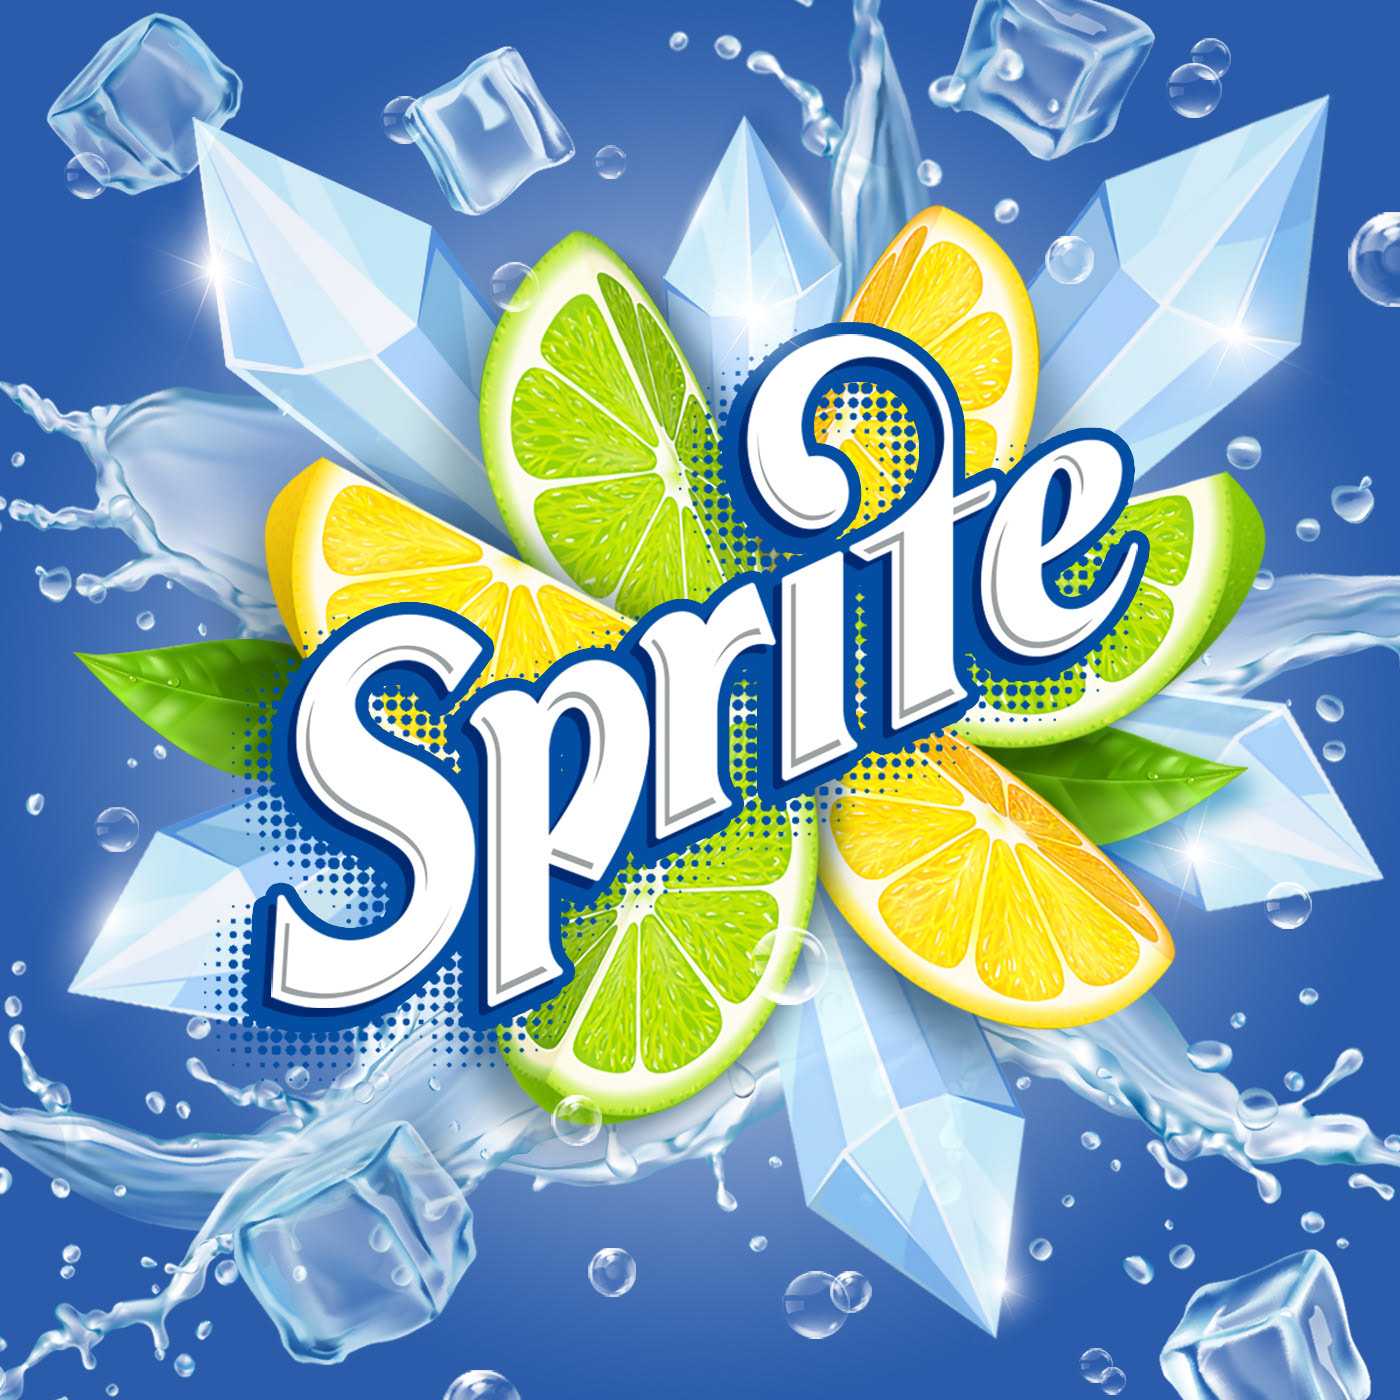 The Cool Sprite Packaging Concept Design